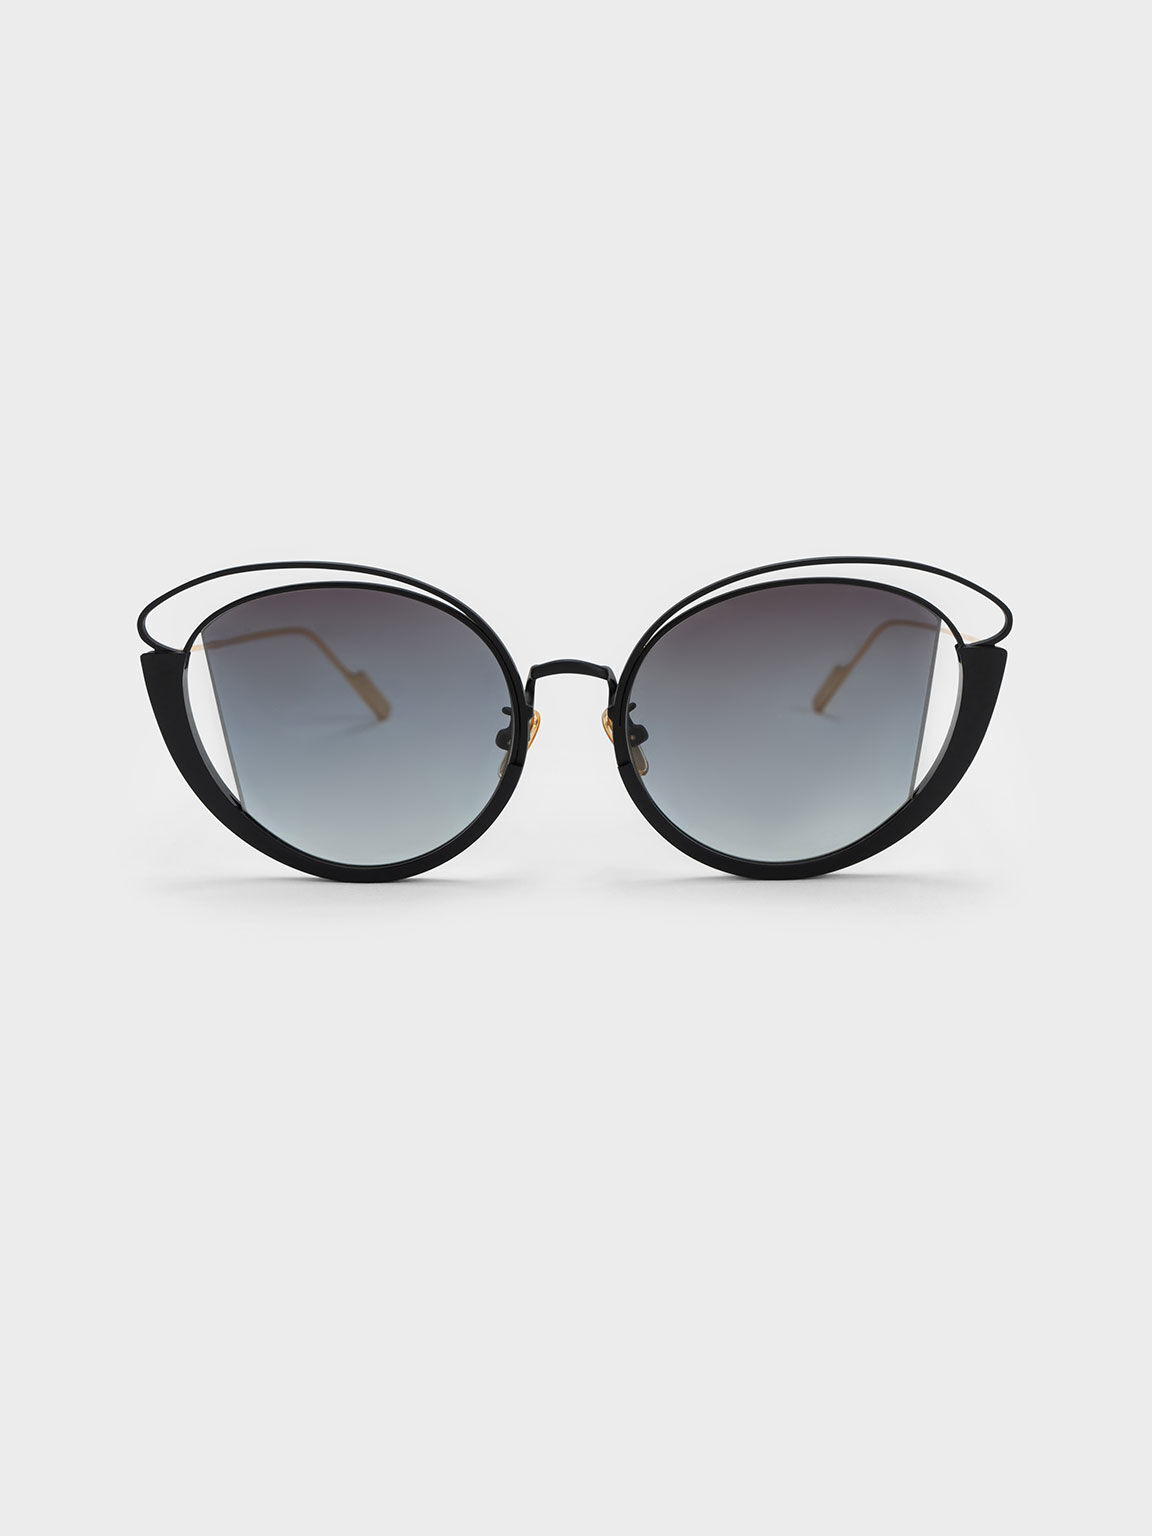 Cut-Out Wireframe Oval Sunglasses, Black, hi-res